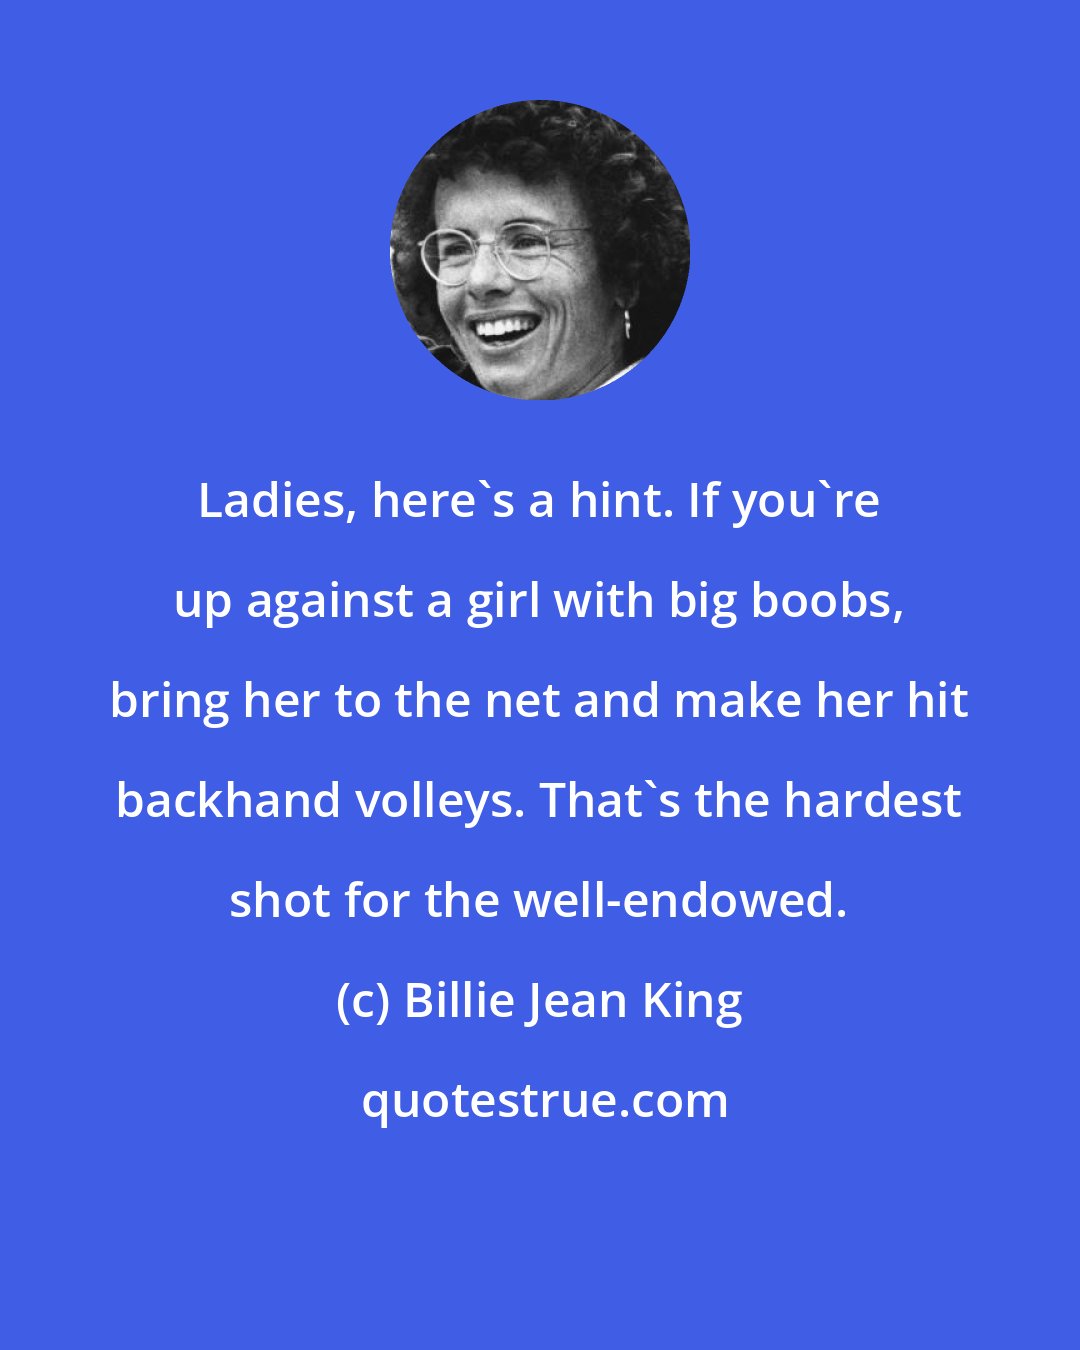 Billie Jean King: Ladies, here's a hint. If you're up against a girl with big boobs, bring her to the net and make her hit backhand volleys. That's the hardest shot for the well-endowed.